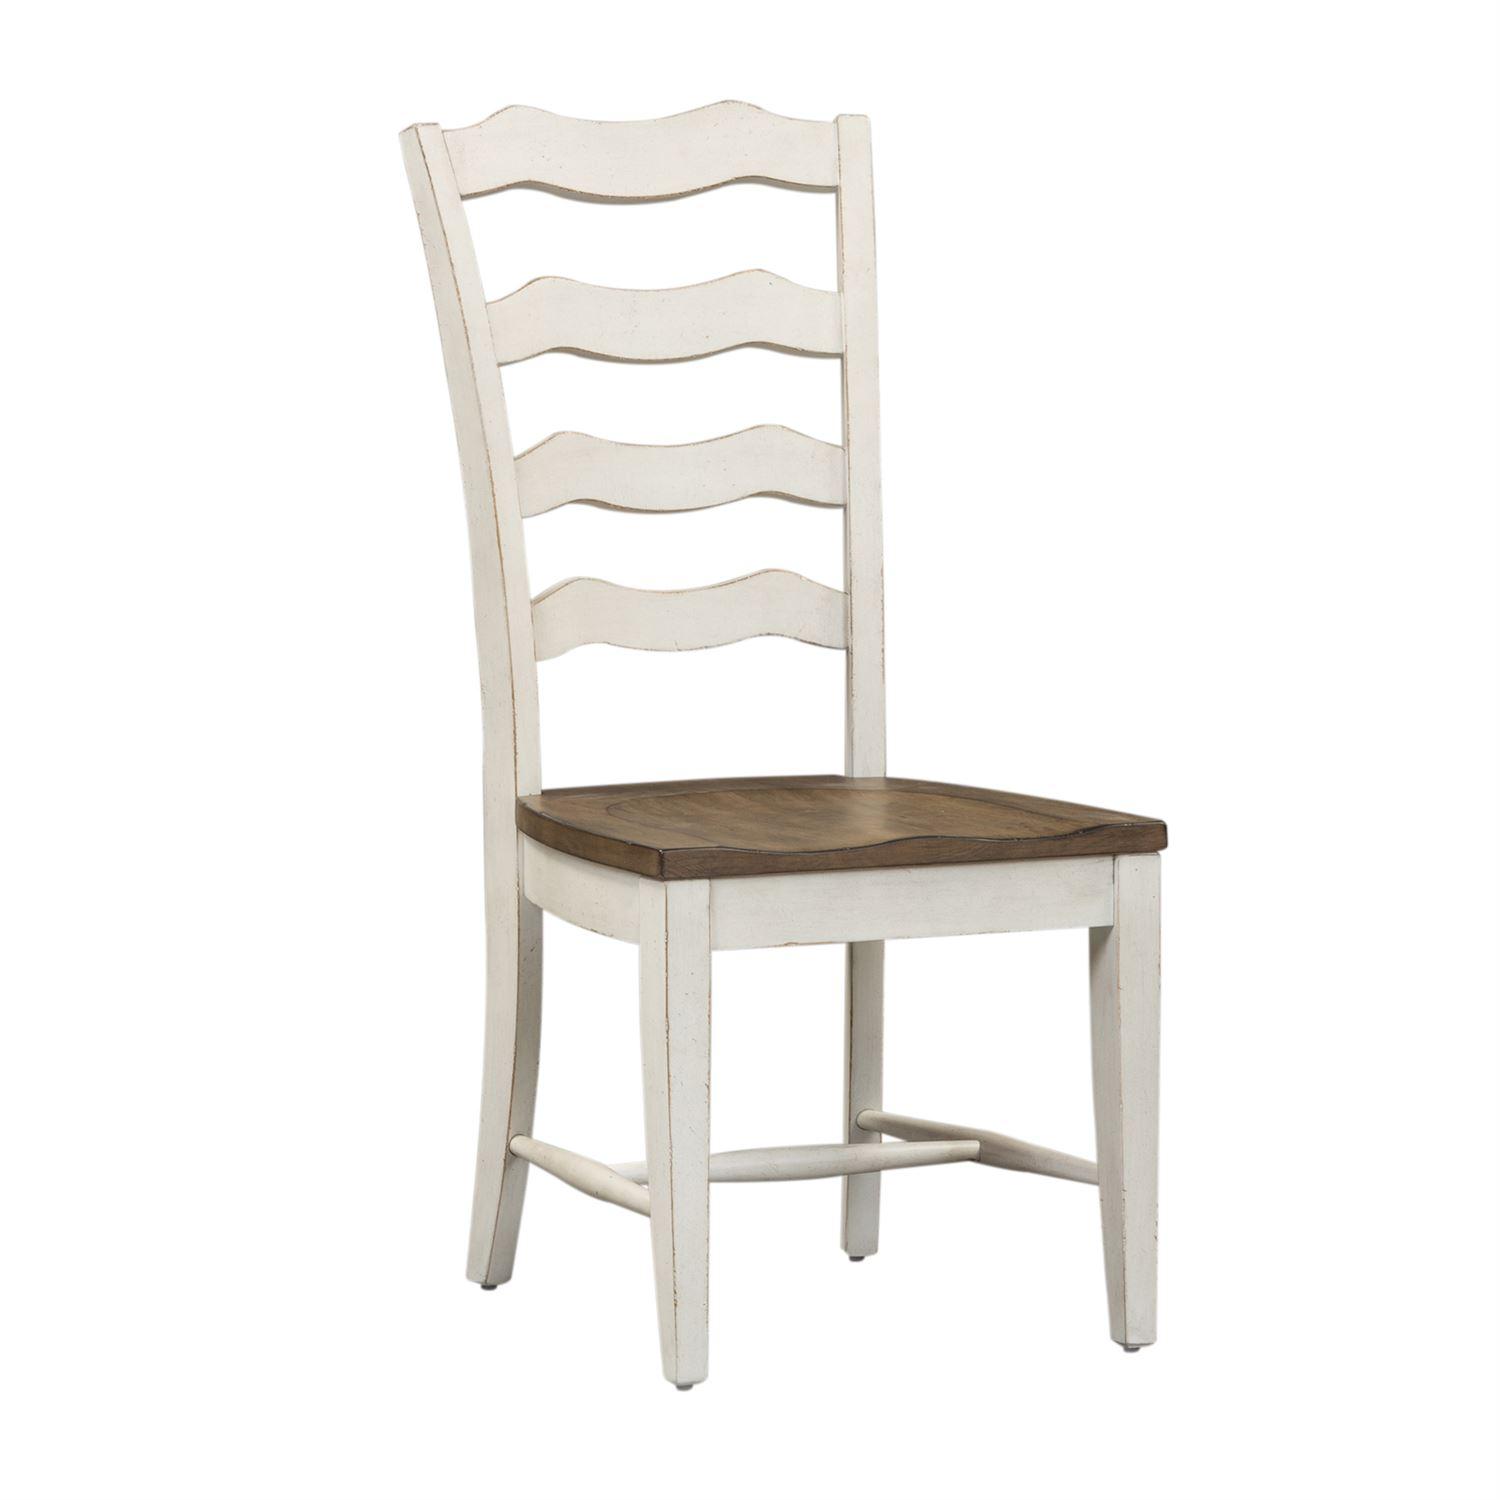   Parisian Marketplace  (698-DR) Dining Side Chair  